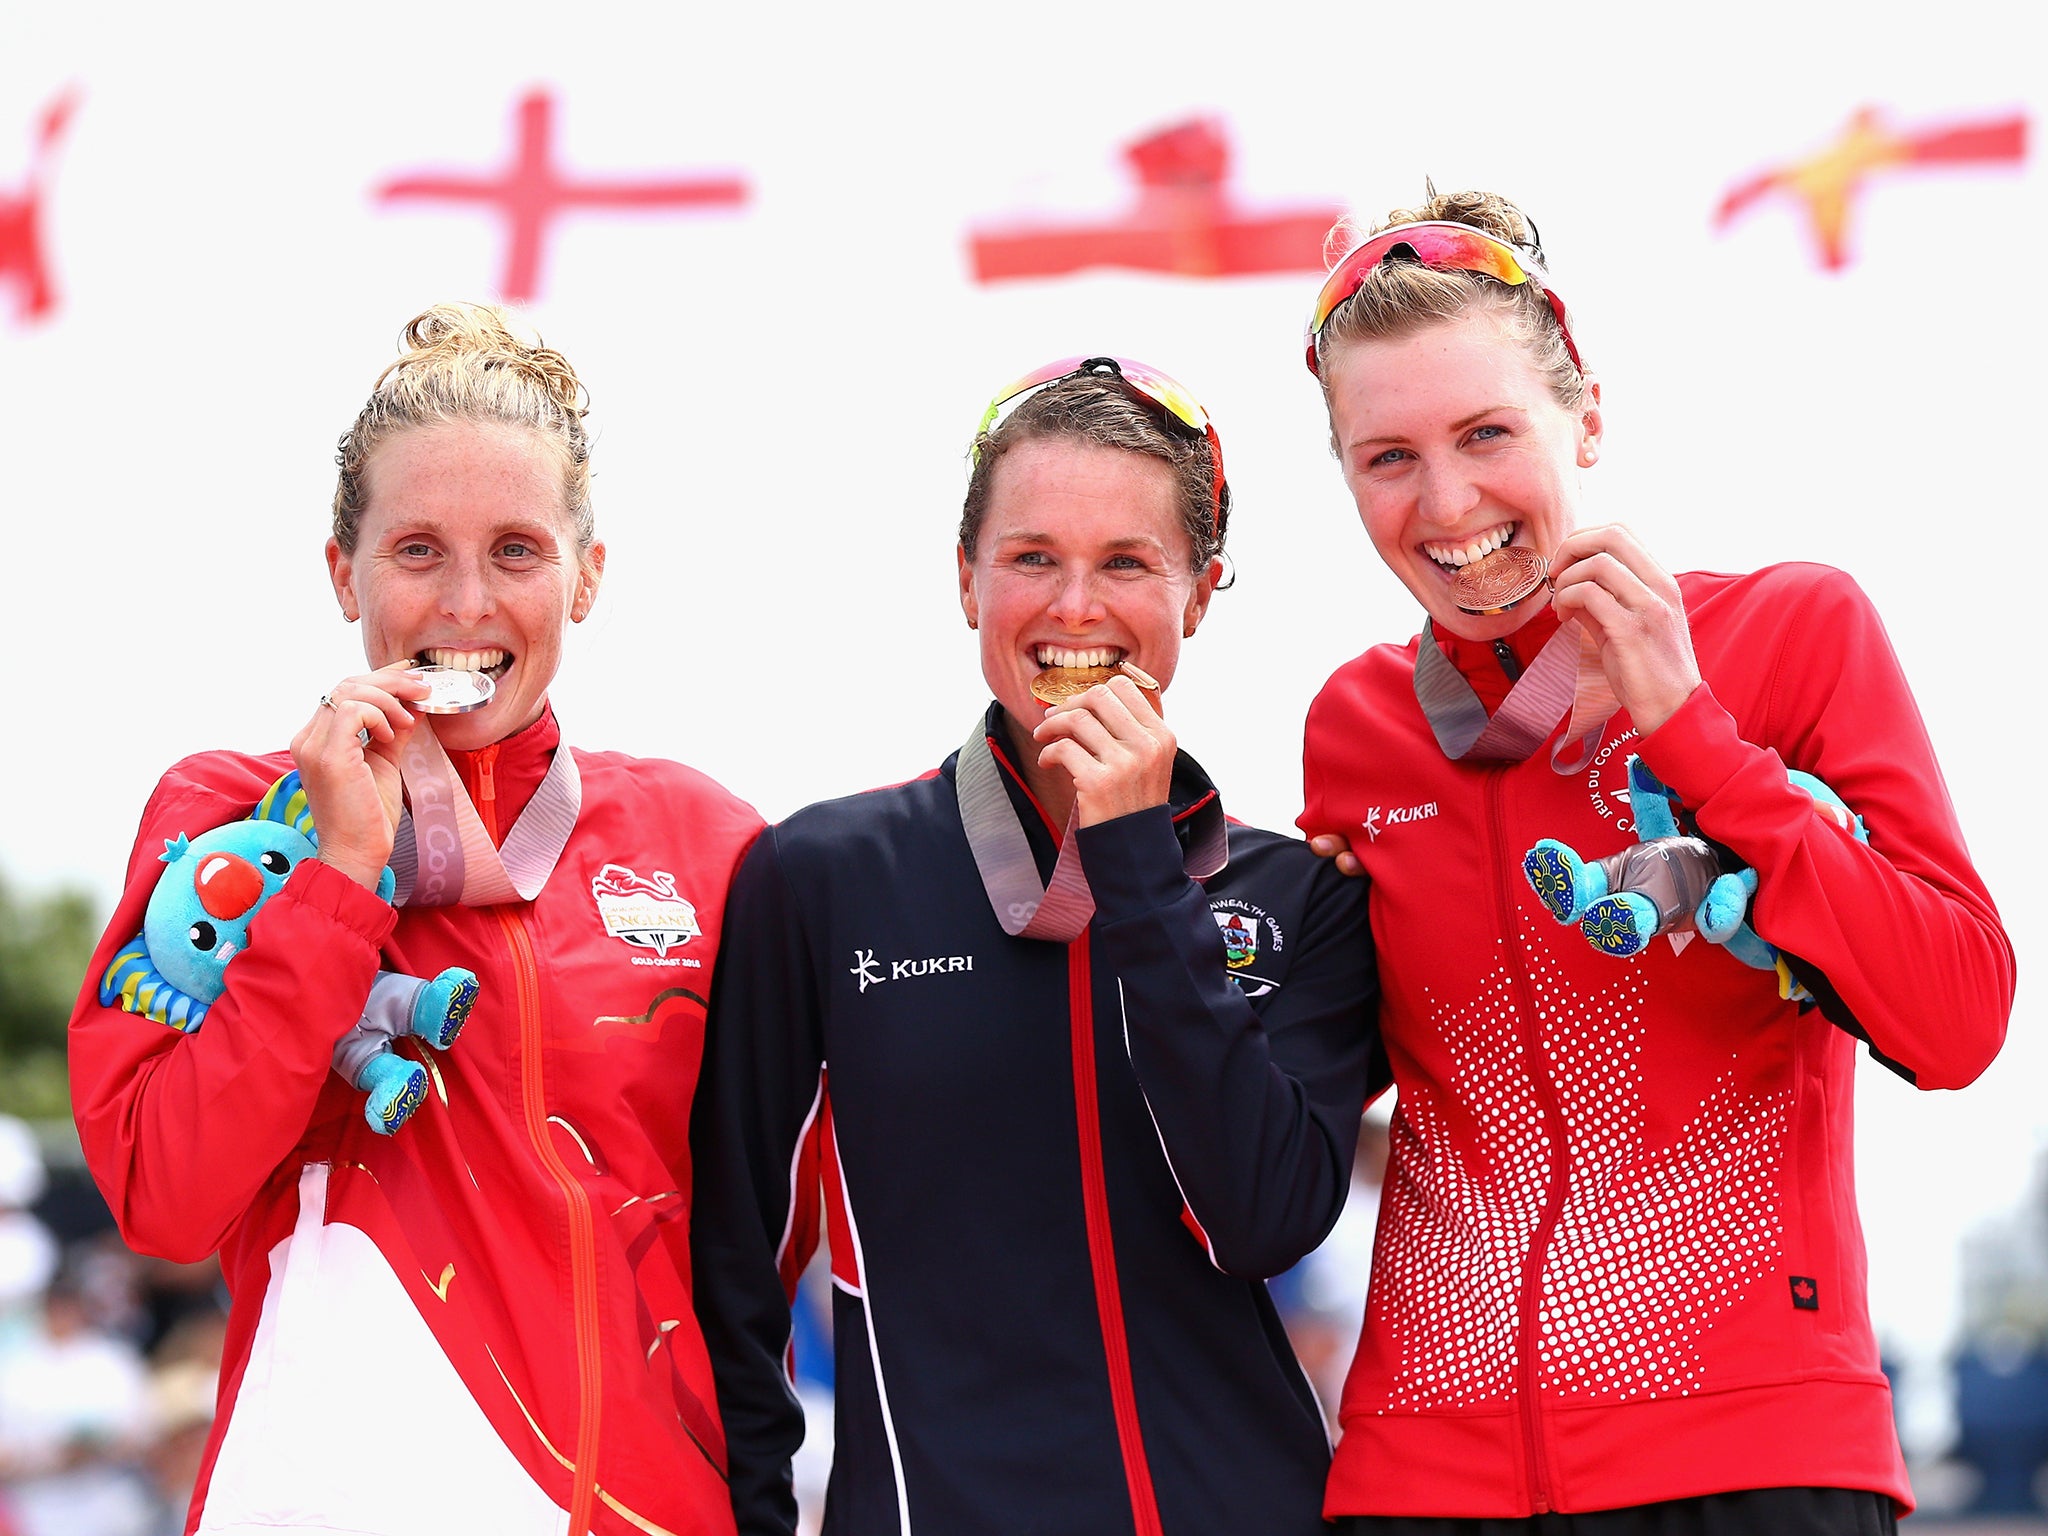 Jessica Learmonth (left) claimed the bronze medal in the women's triathlon